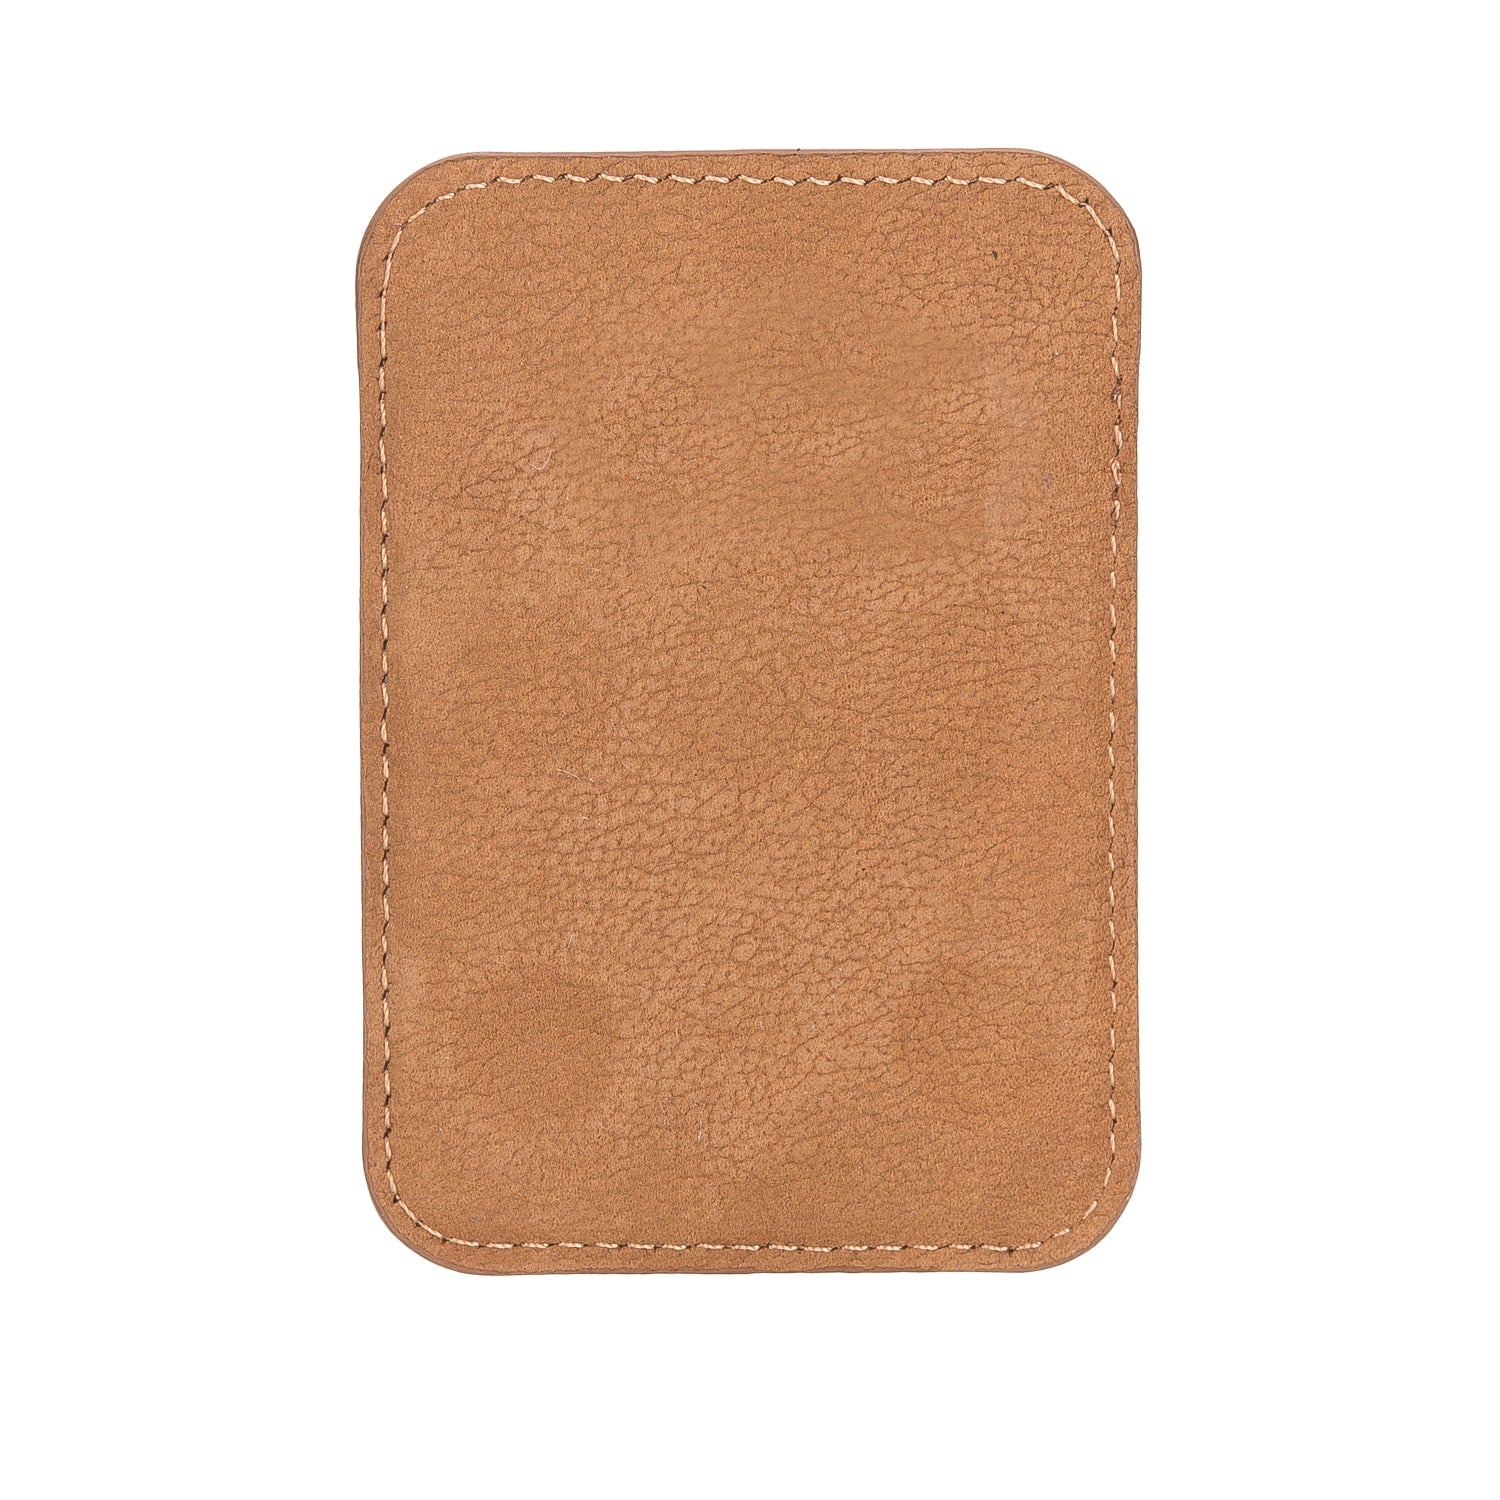 Brown Leather Apple MagSafe Card Holder Magnetic Wallet for iPhone - Bomonti - 5